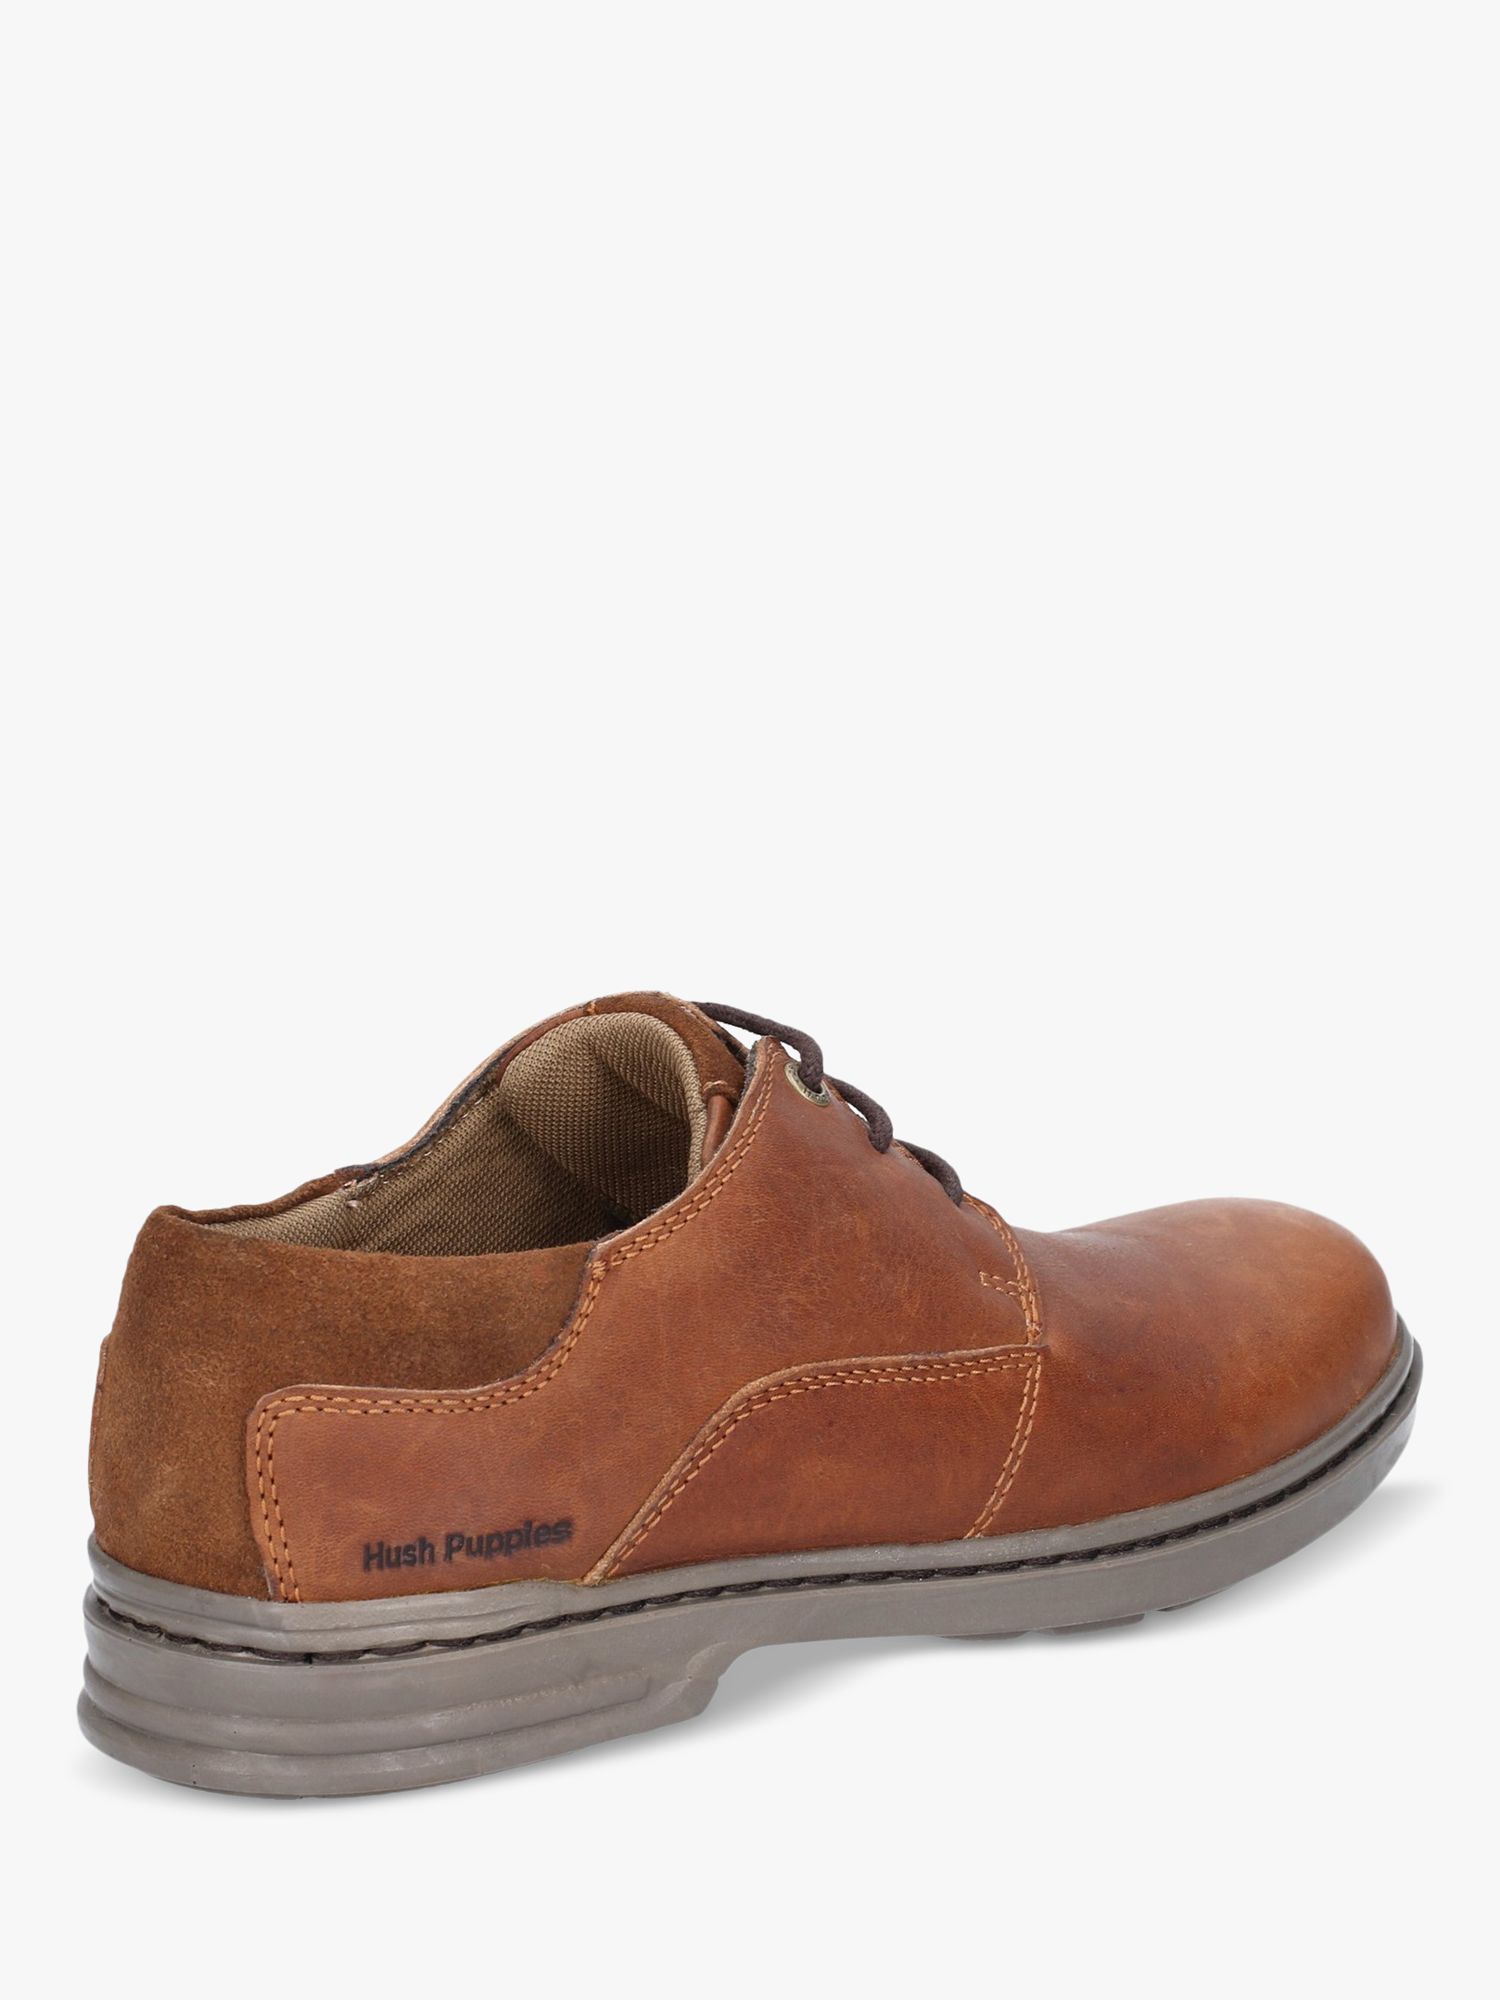 Puppies Mat Hanson Leather Classic Casual Shoes, at John Lewis Partners